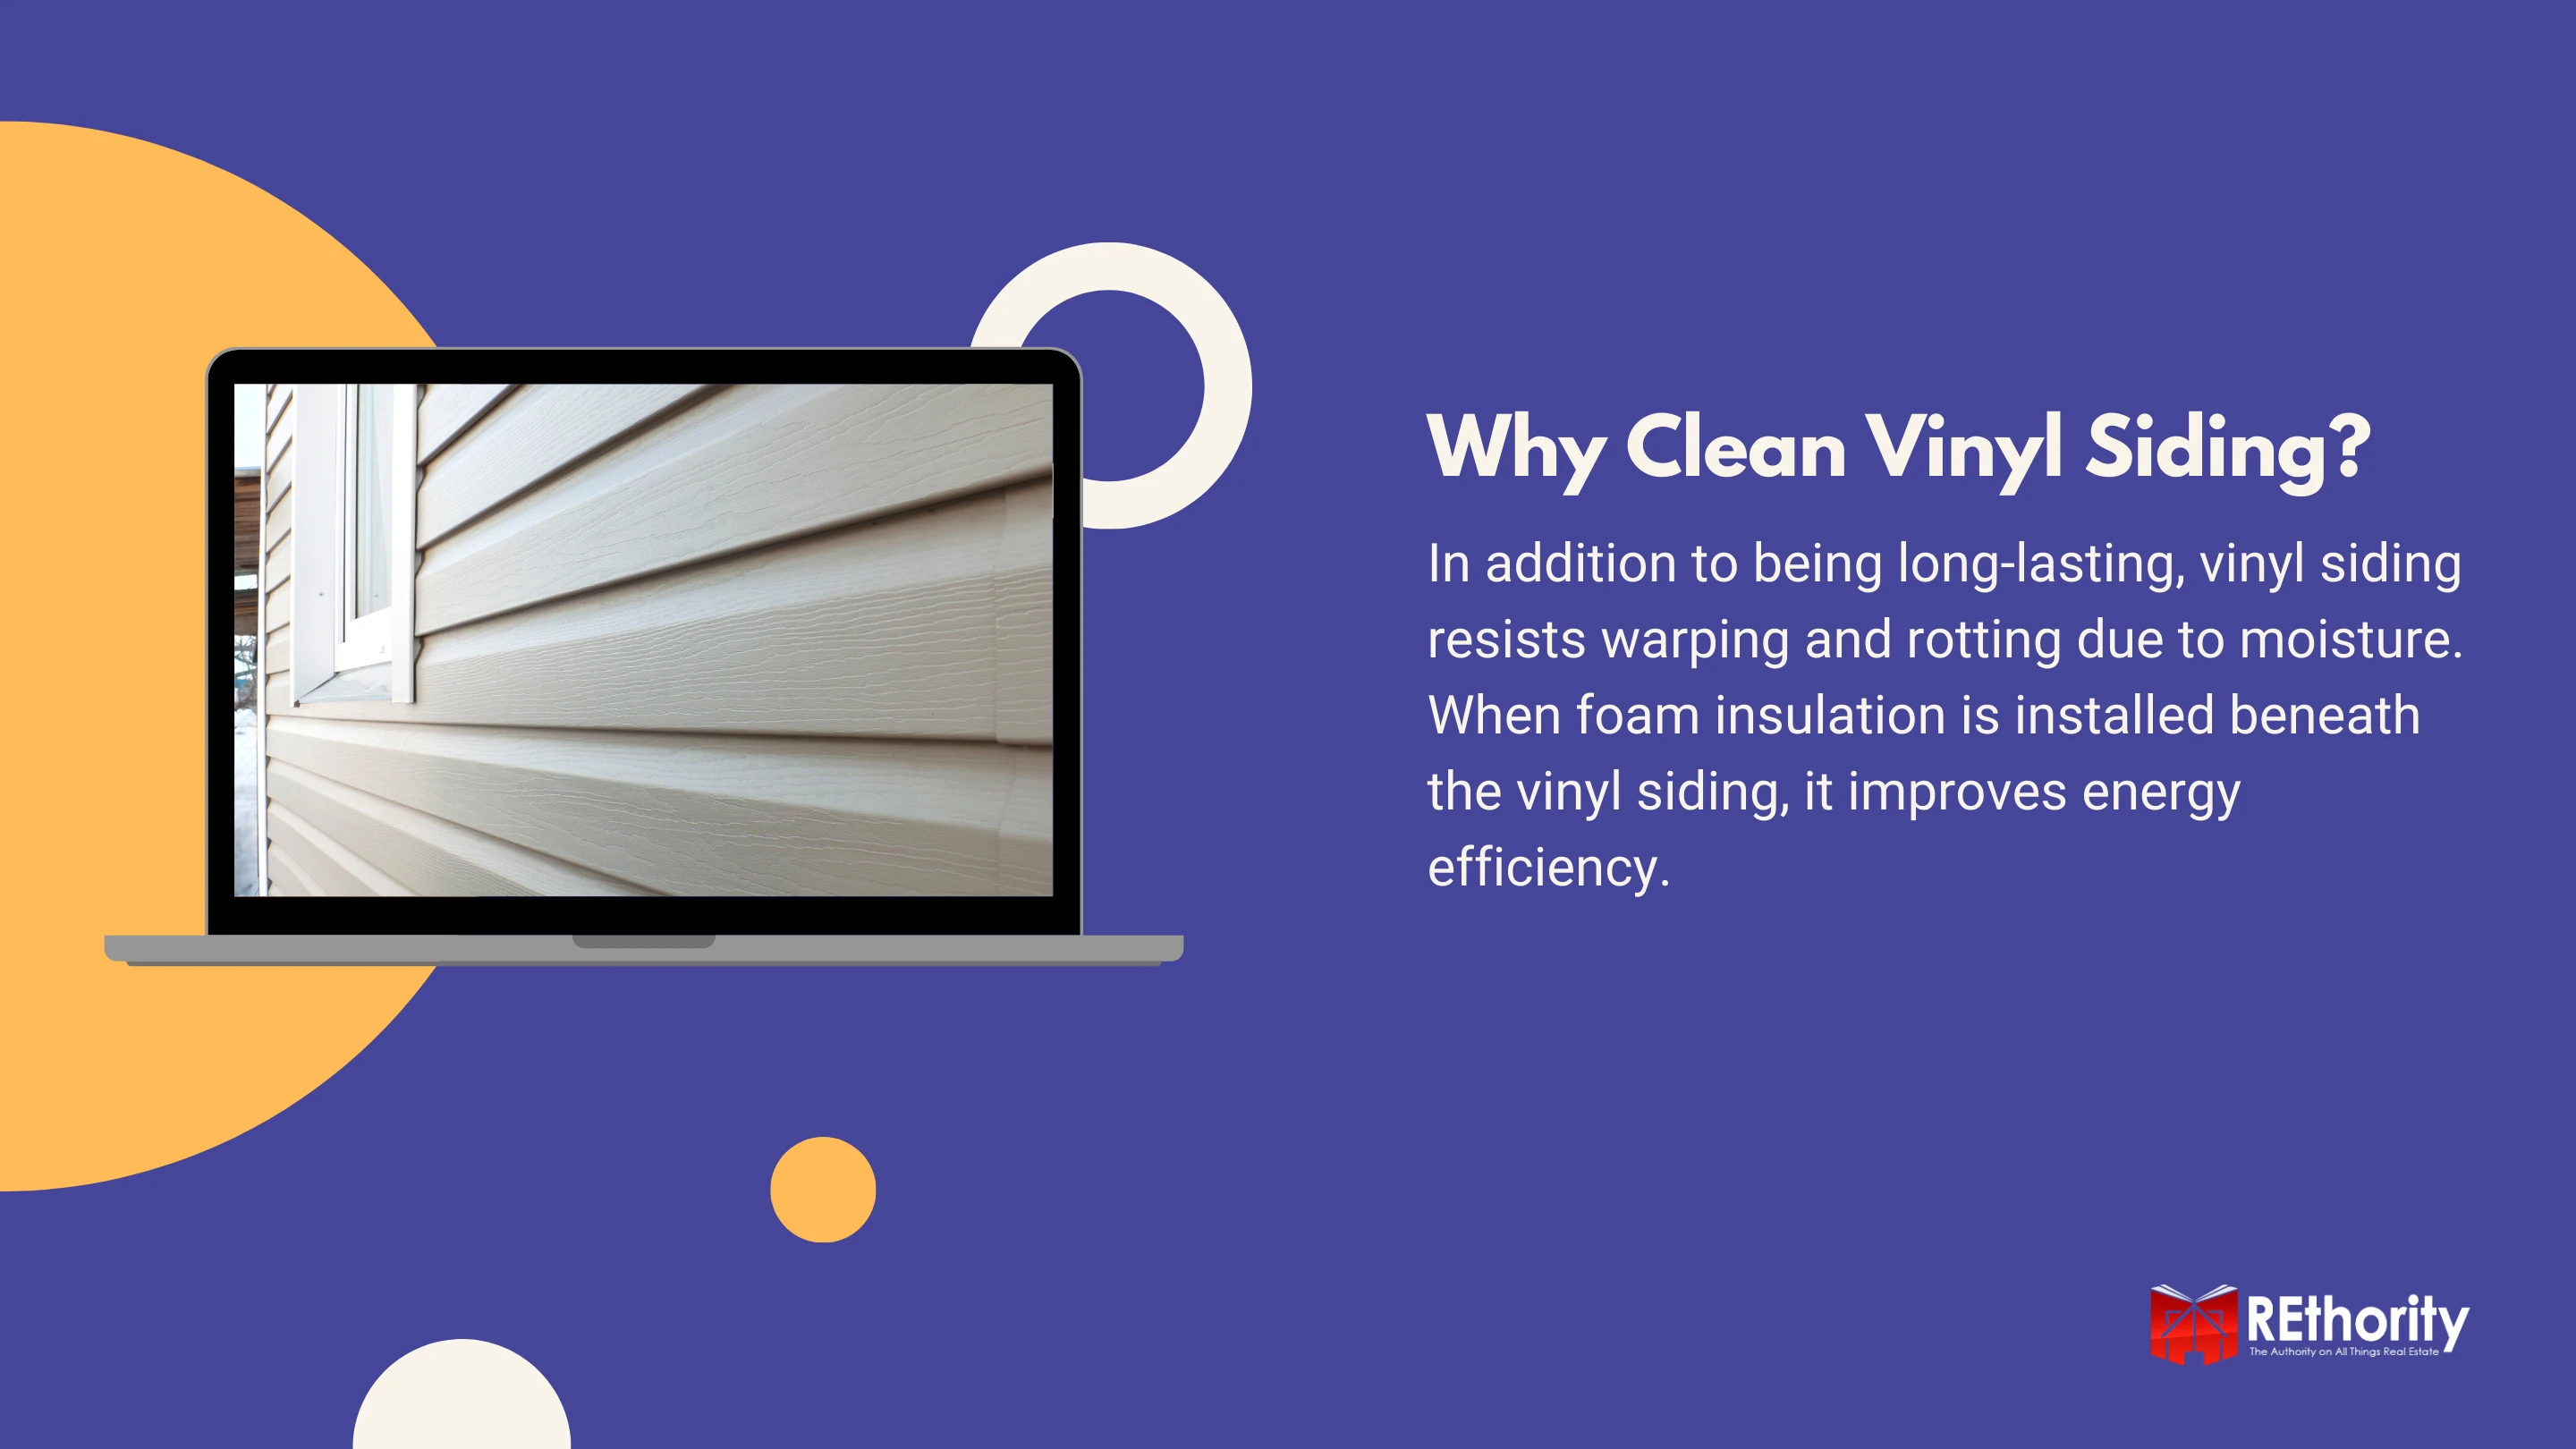 Graphic explaining why to clean vinyl siding against a blue background